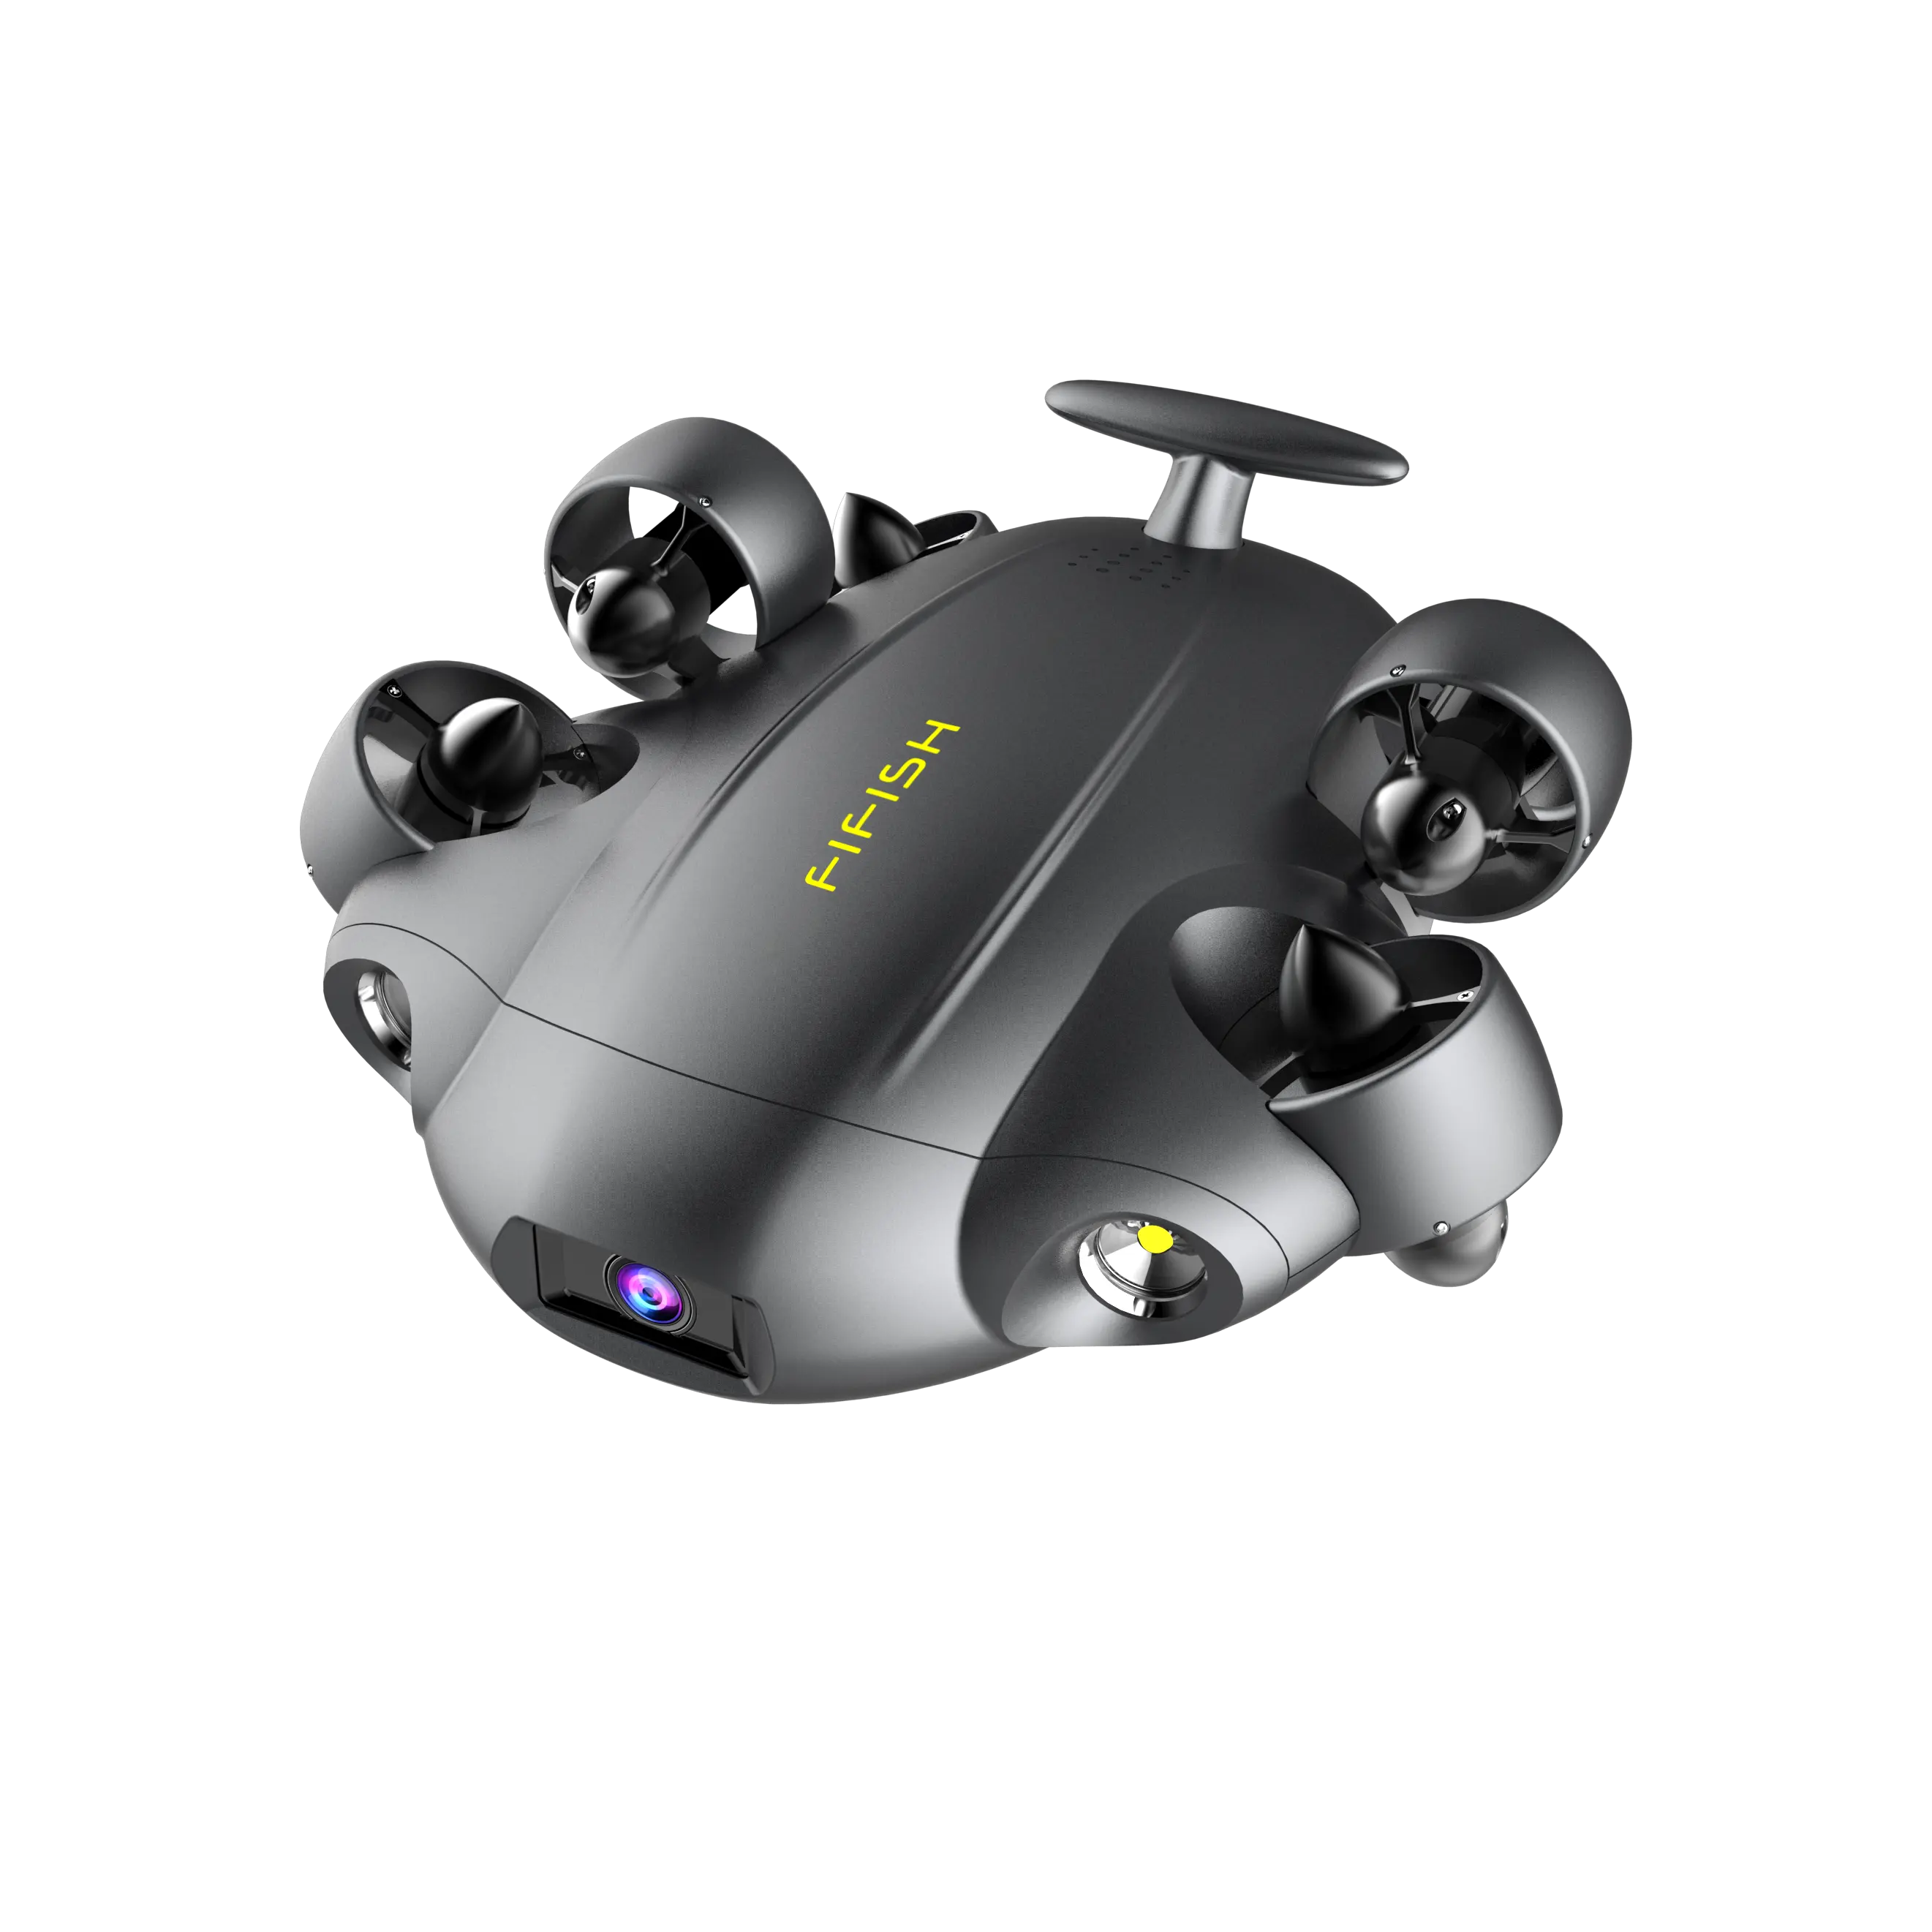 FIFISH V6 Expert Underwater Robot professional-level Productvity Tool camera